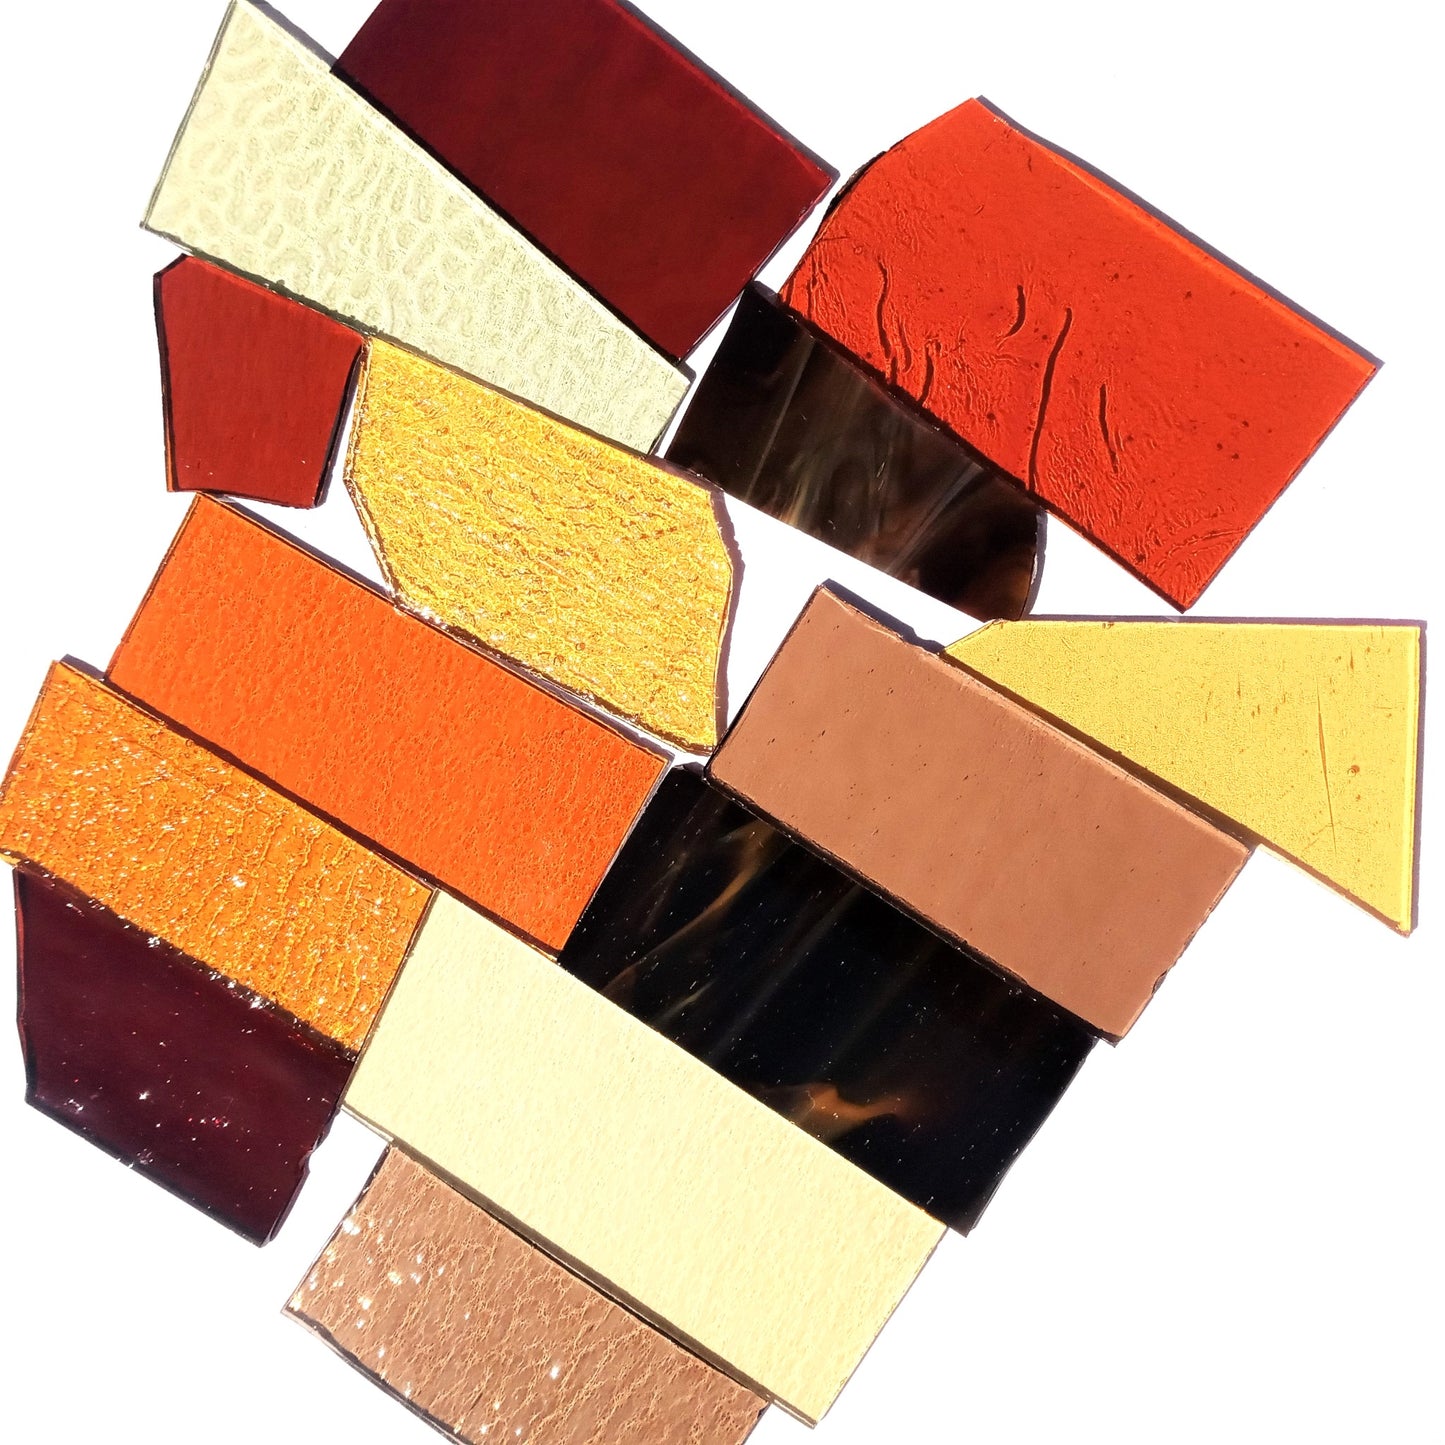 Brown Amber Stained Glass Scraps, Curated 1 lb Package of Reclaimed Shop Scrap Glass in Shades of Brown, Amber